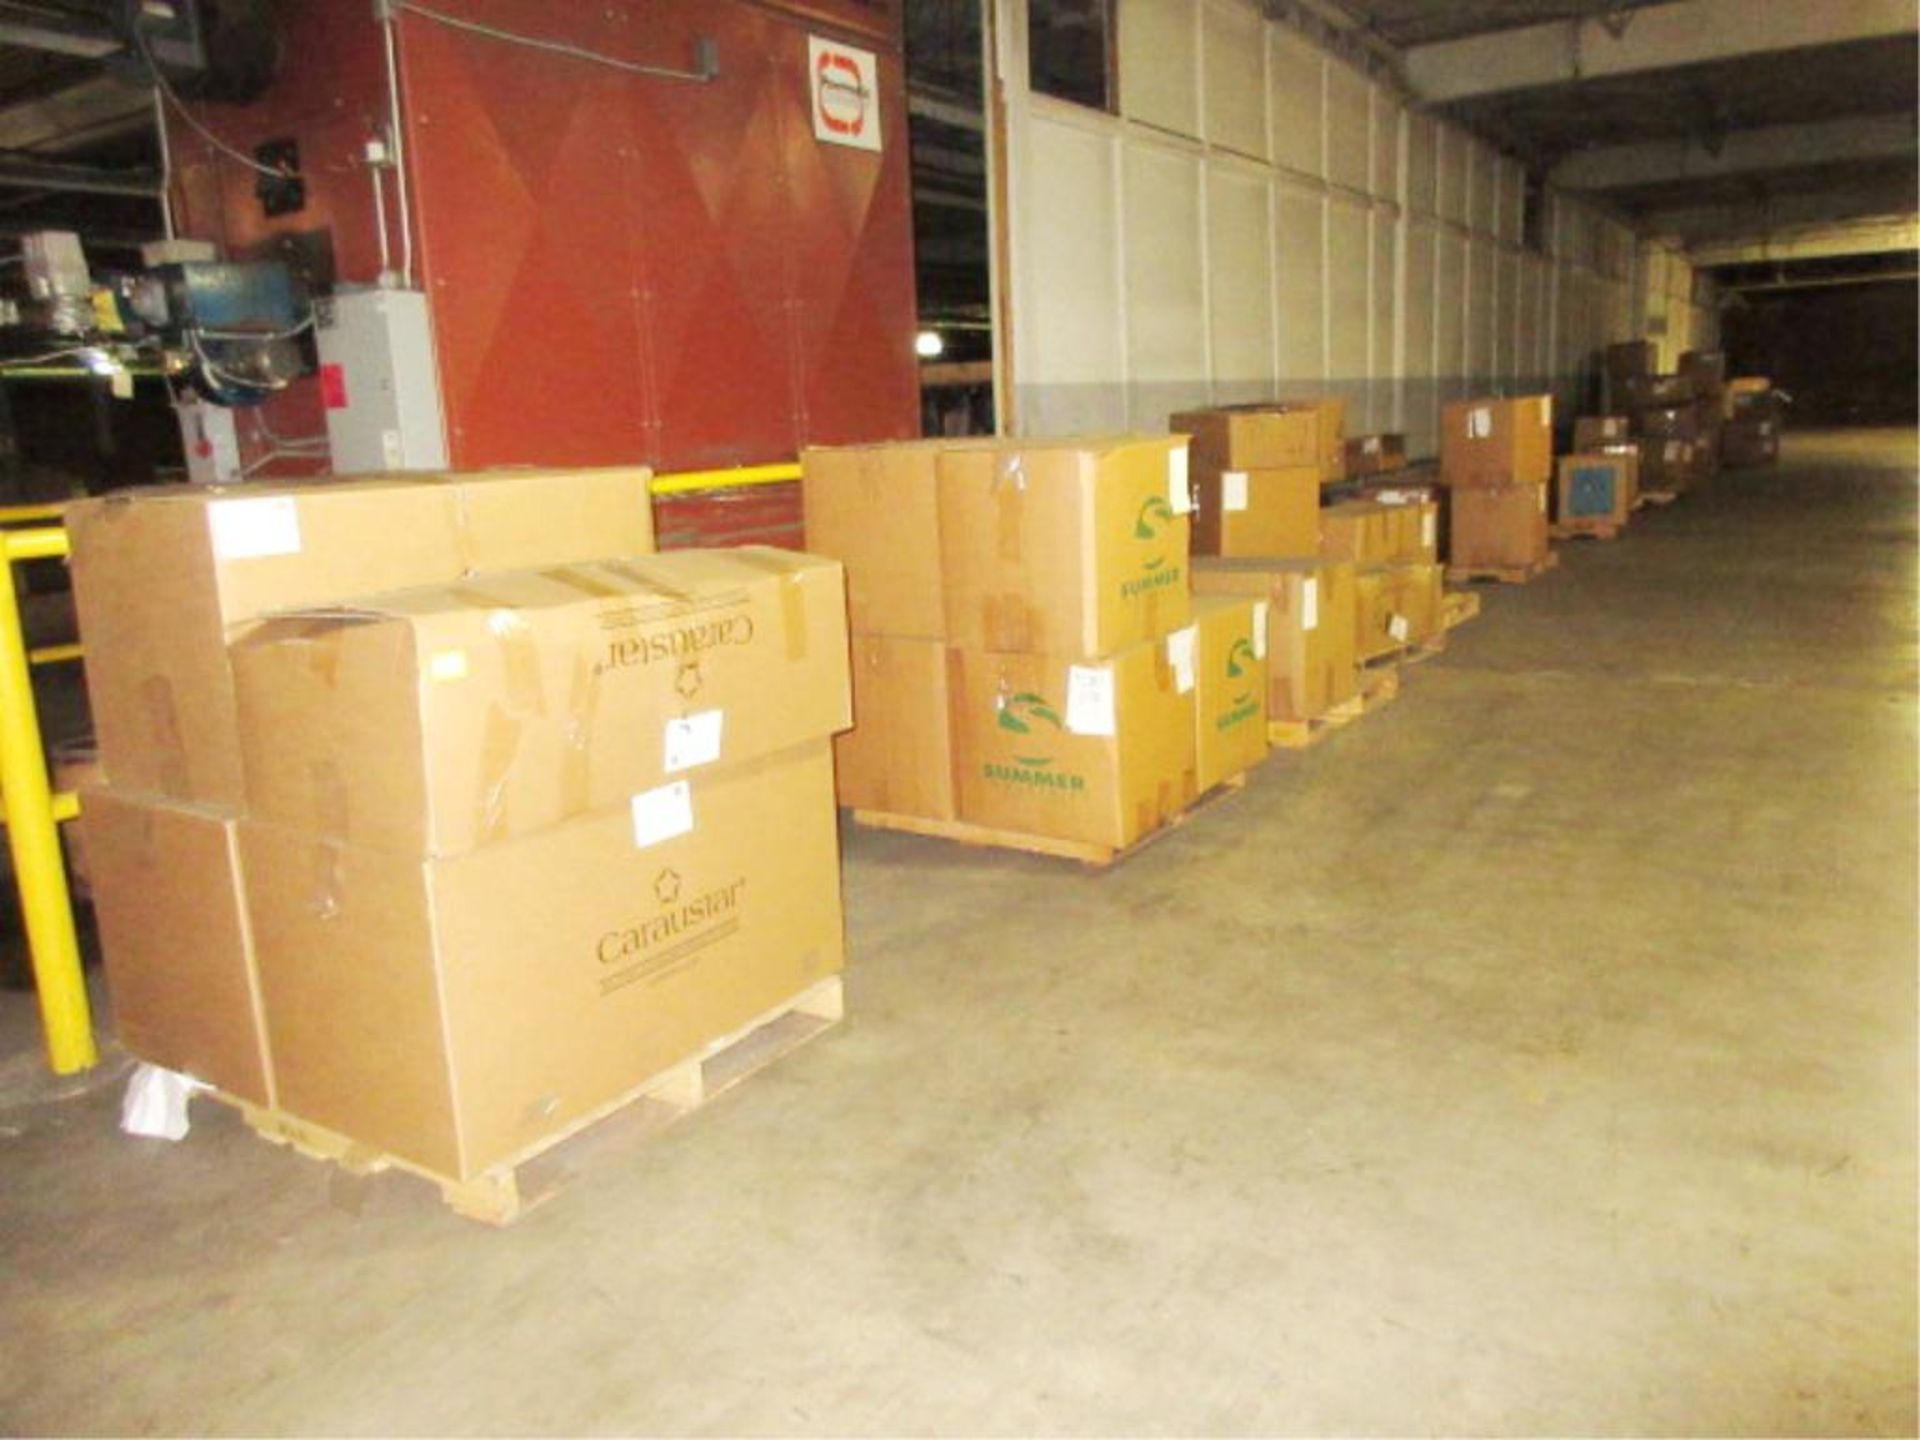 Lot Assorted Corrugated Fiber Cores, all on 19 pallets, in one row. HIT# 2179468. whse 3. Asset